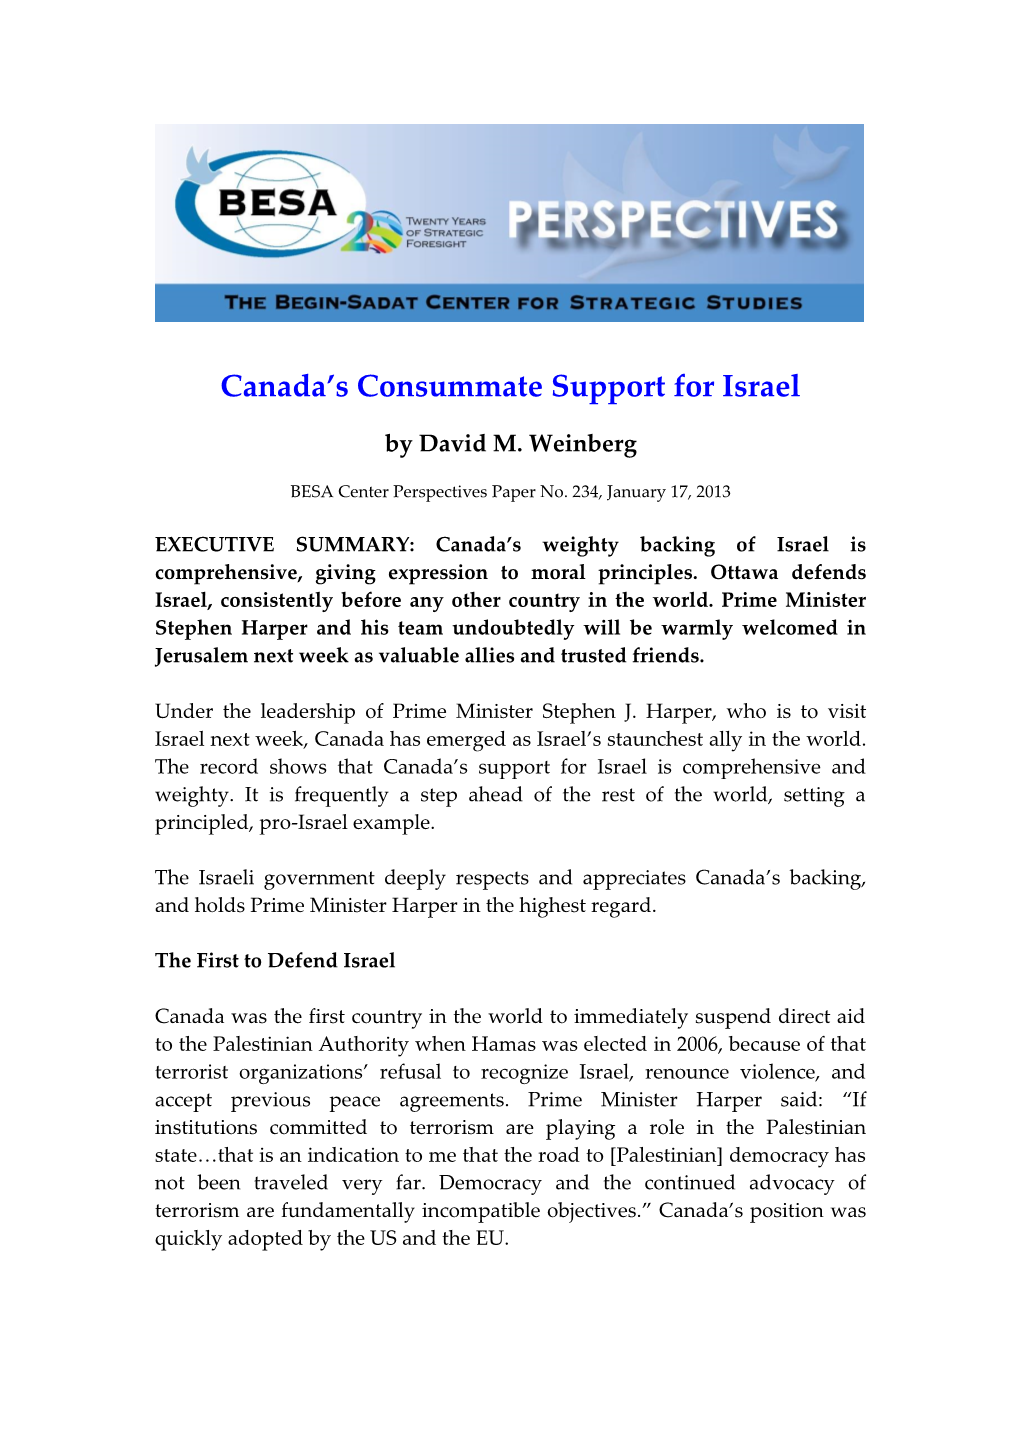 Canada's Consummate Support for Israel